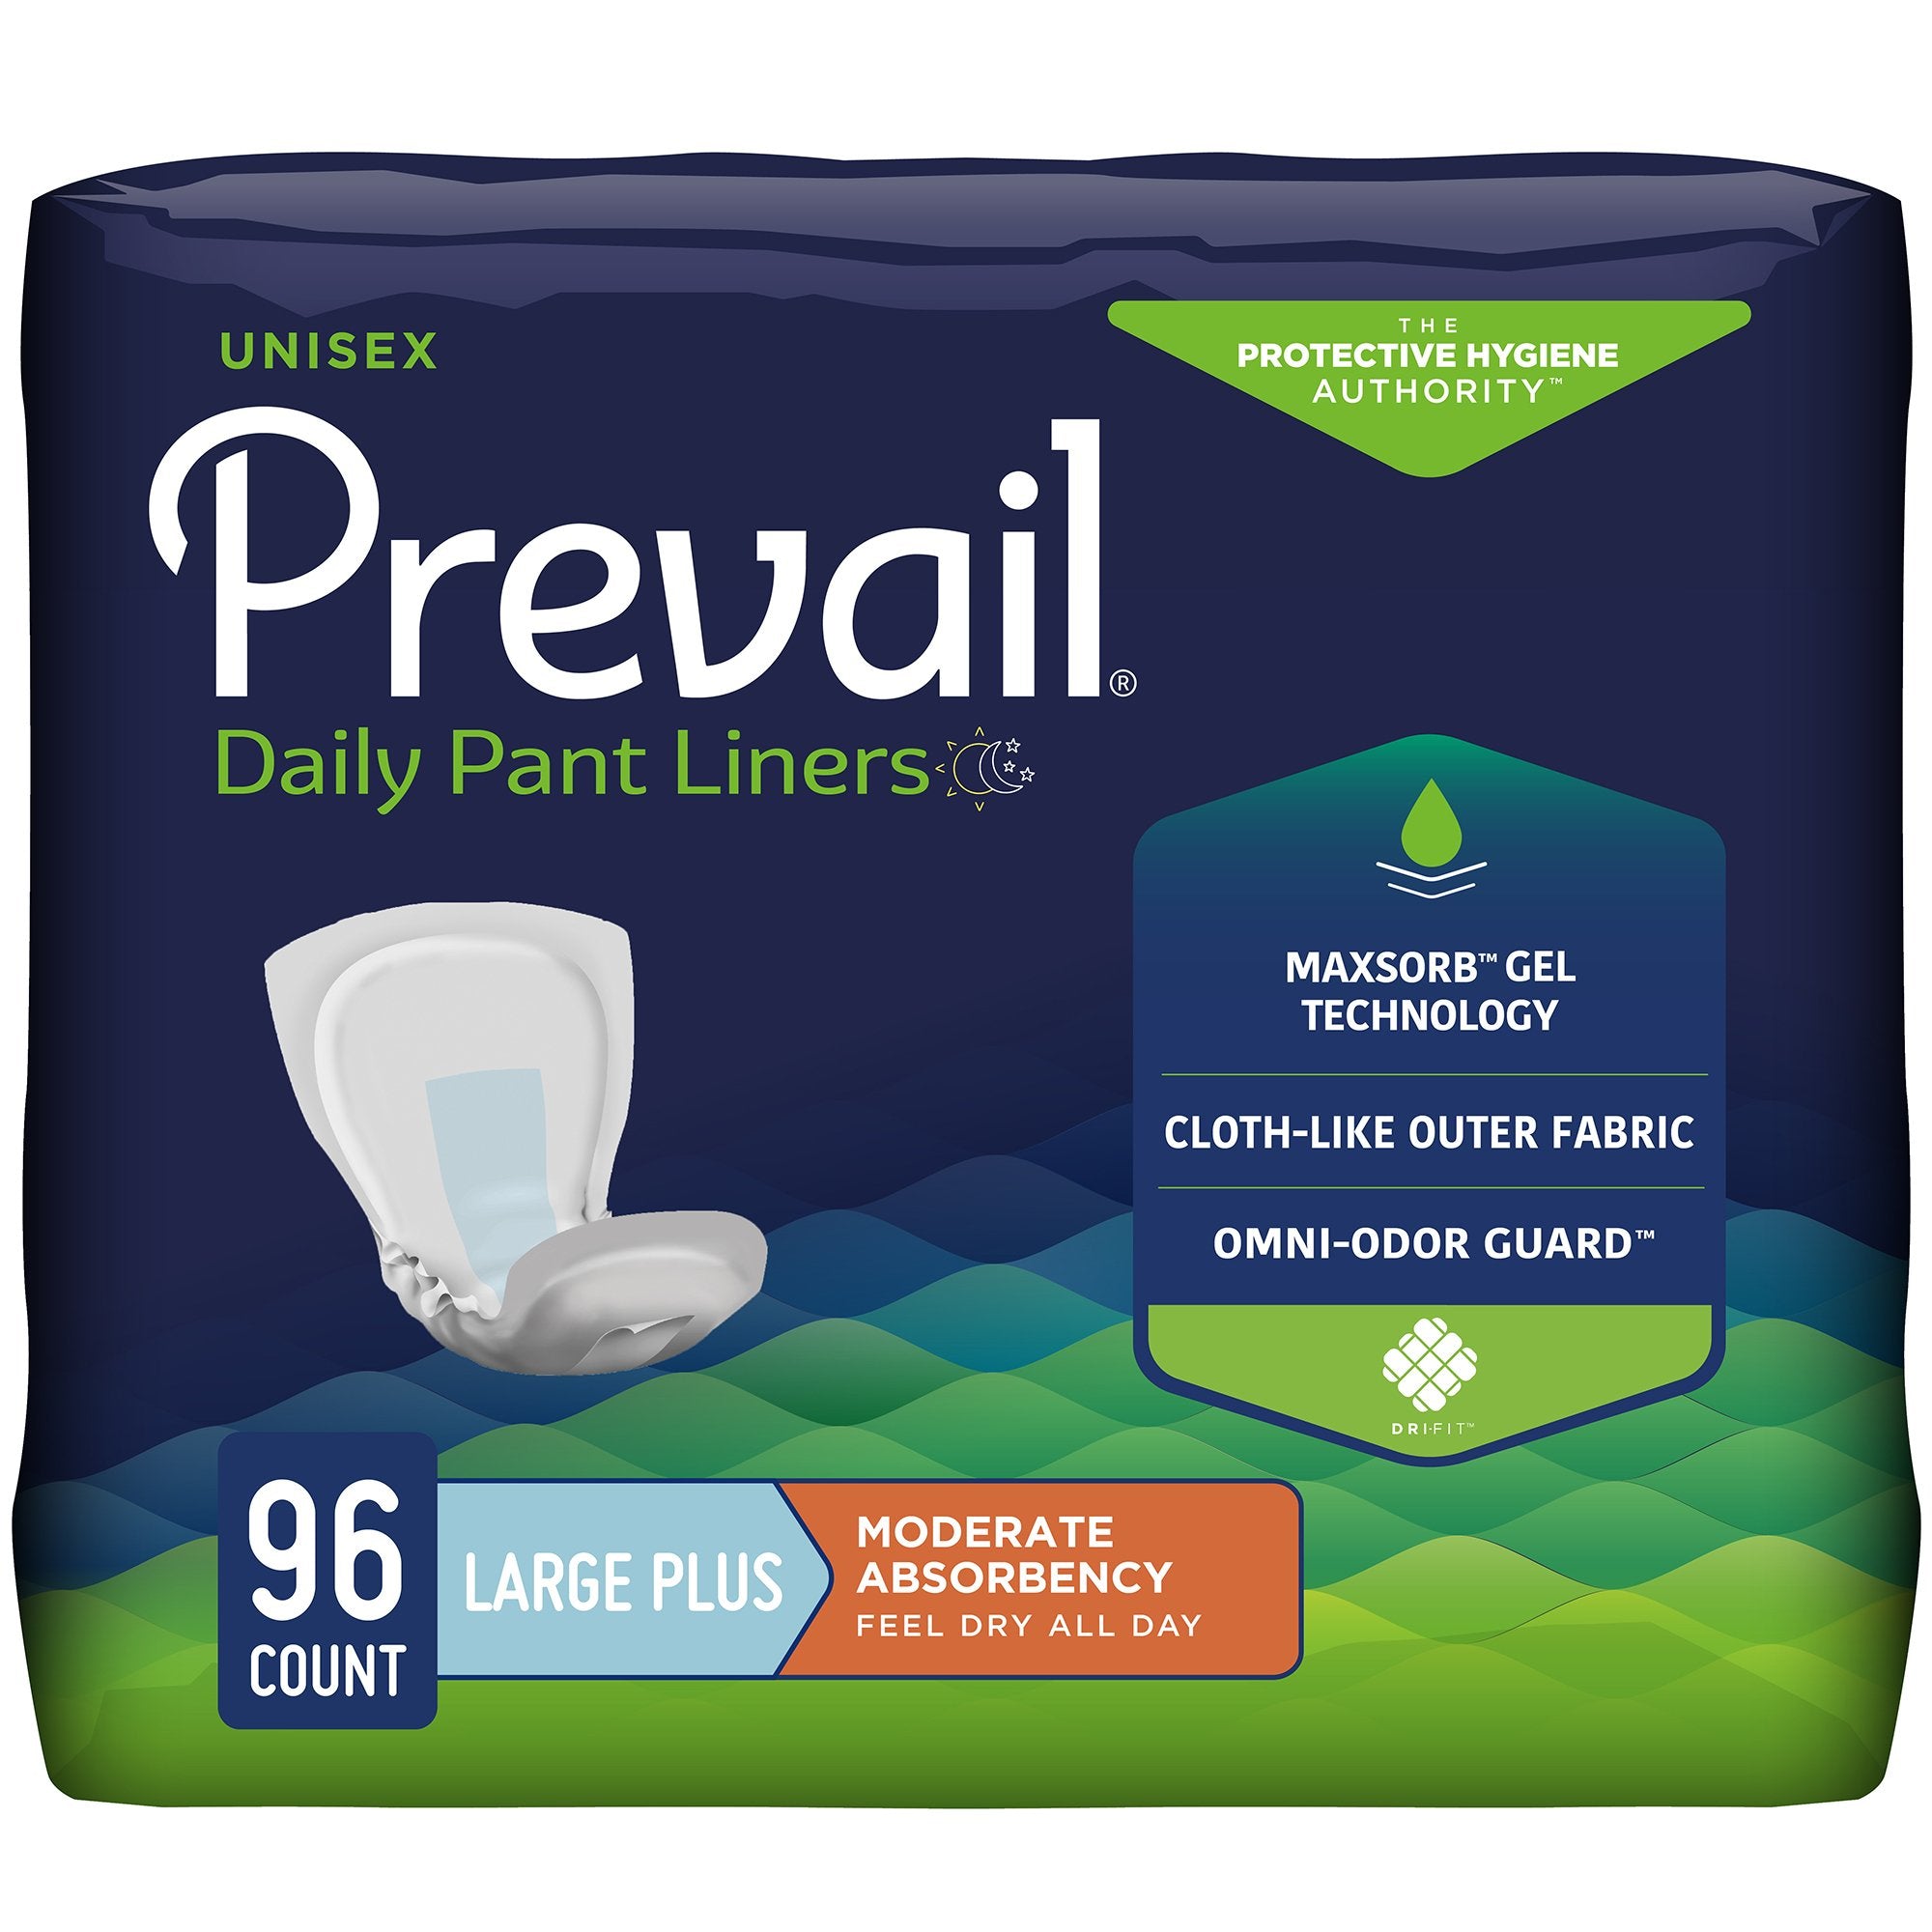 Bladder Control Pad Prevail® Daily Pant Liners 28 Inch Length Moderate Absorbency Polymer Core Large Plus